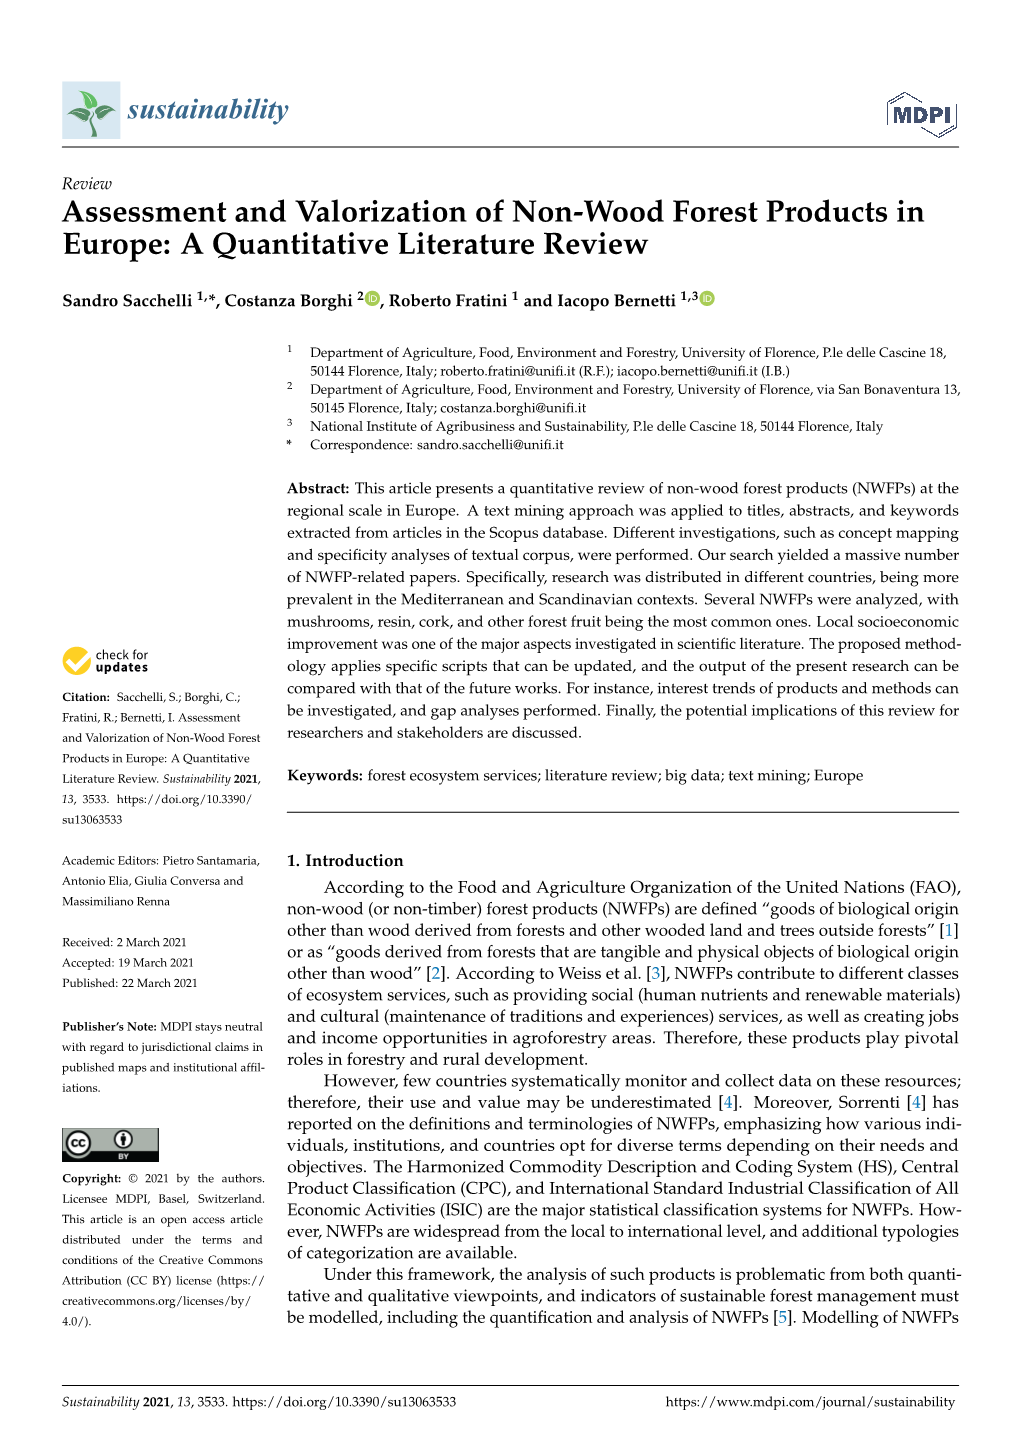 Assessment and Valorization of Non-Wood Forest Products in Europe: a Quantitative Literature Review